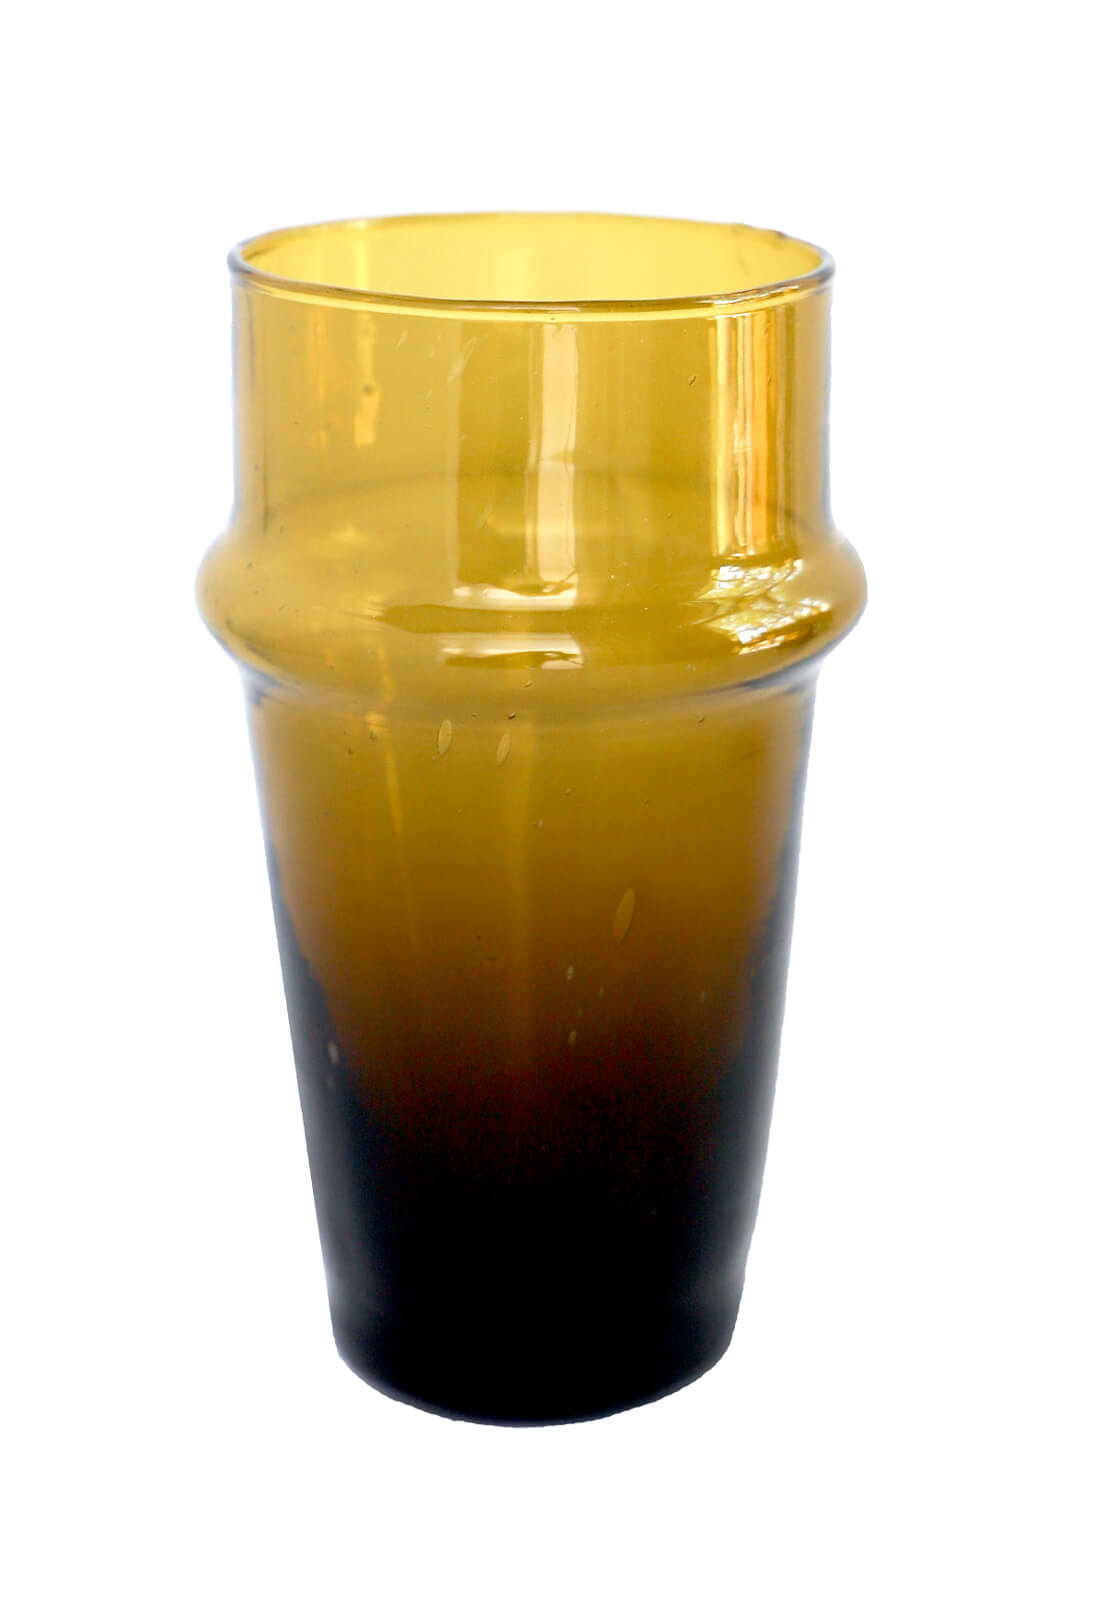 Amber colored recycled glass drinking glass